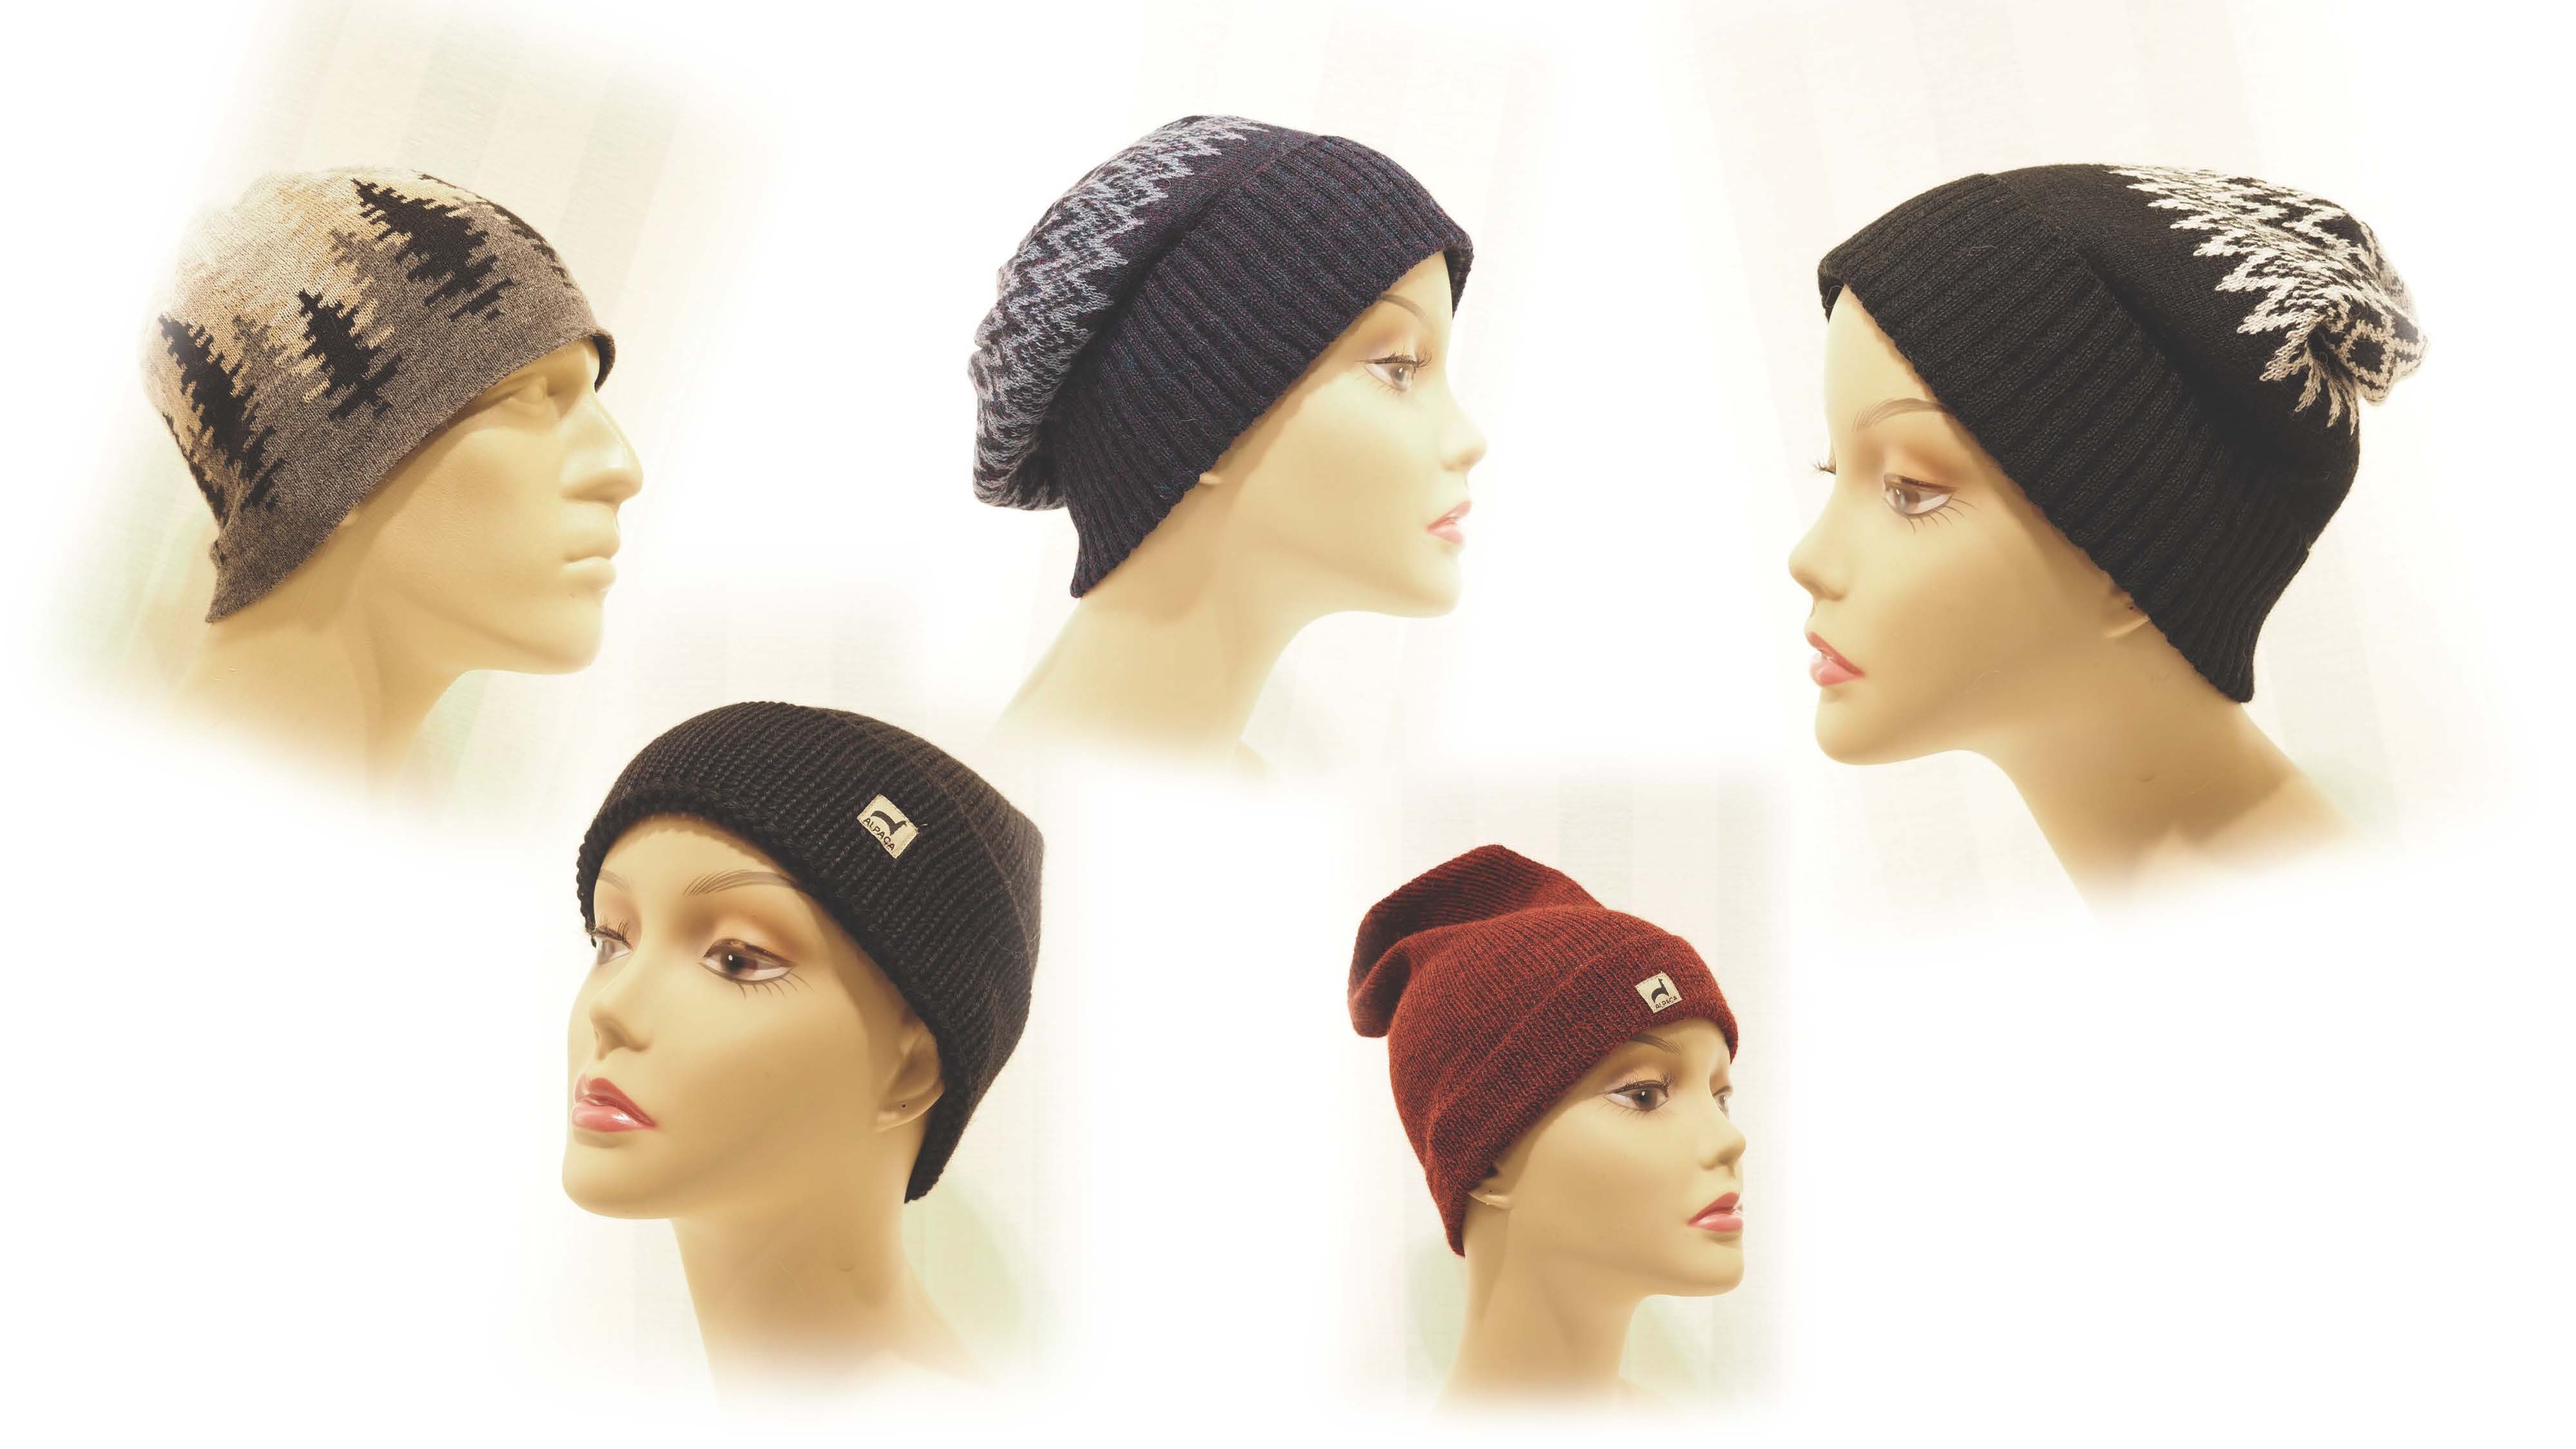 10% off beanies and hats